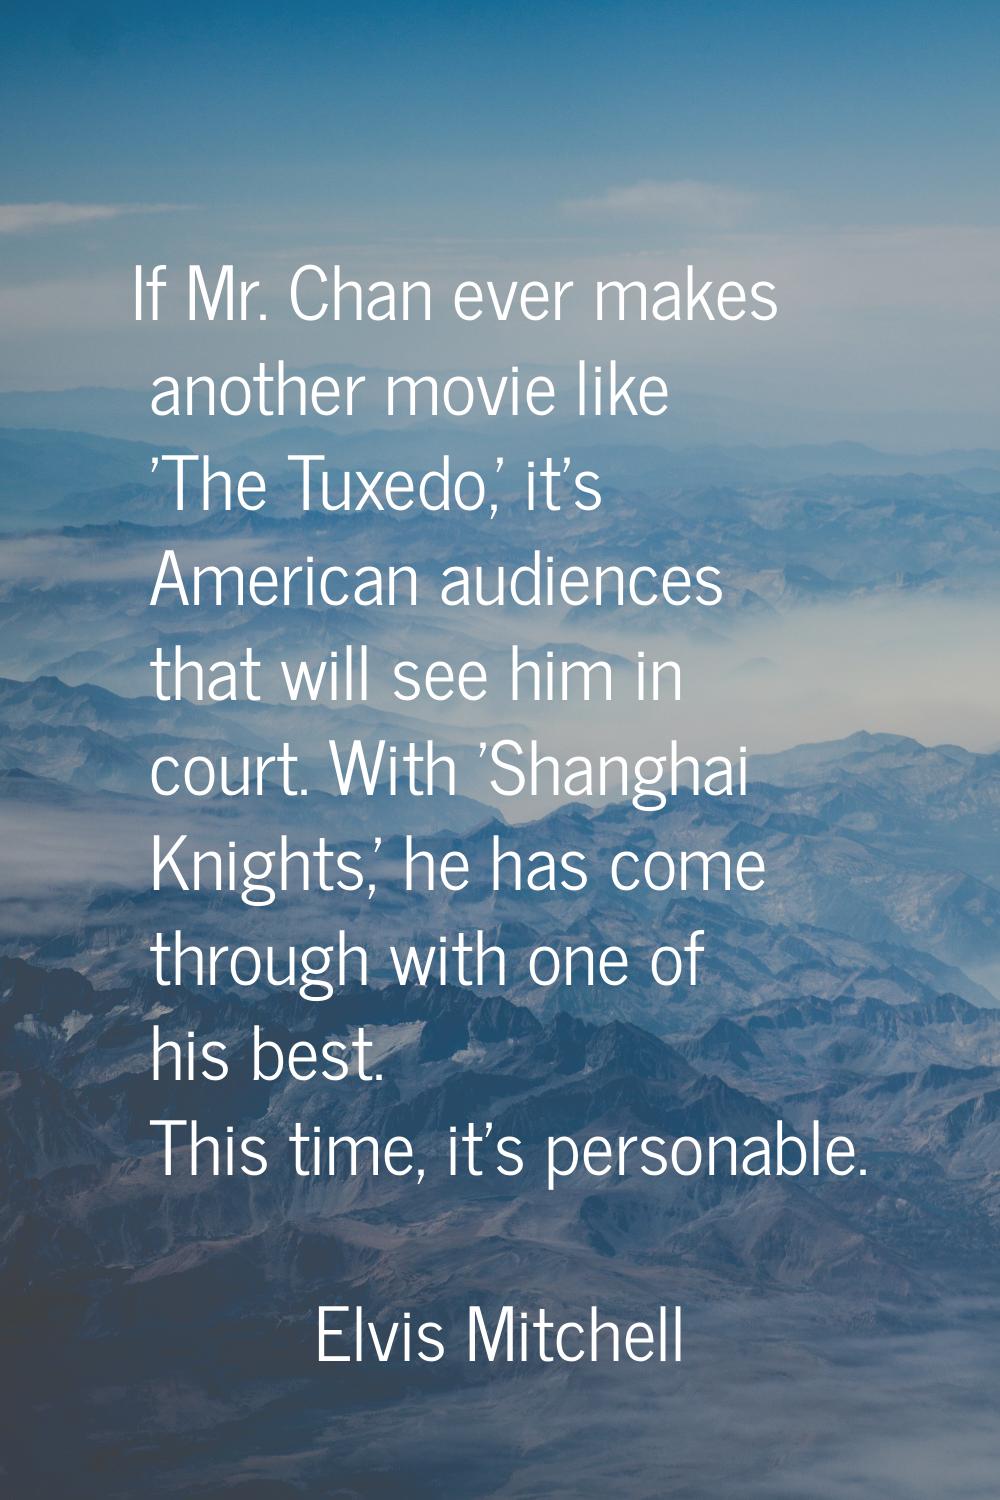 If Mr. Chan ever makes another movie like 'The Tuxedo,' it's American audiences that will see him i